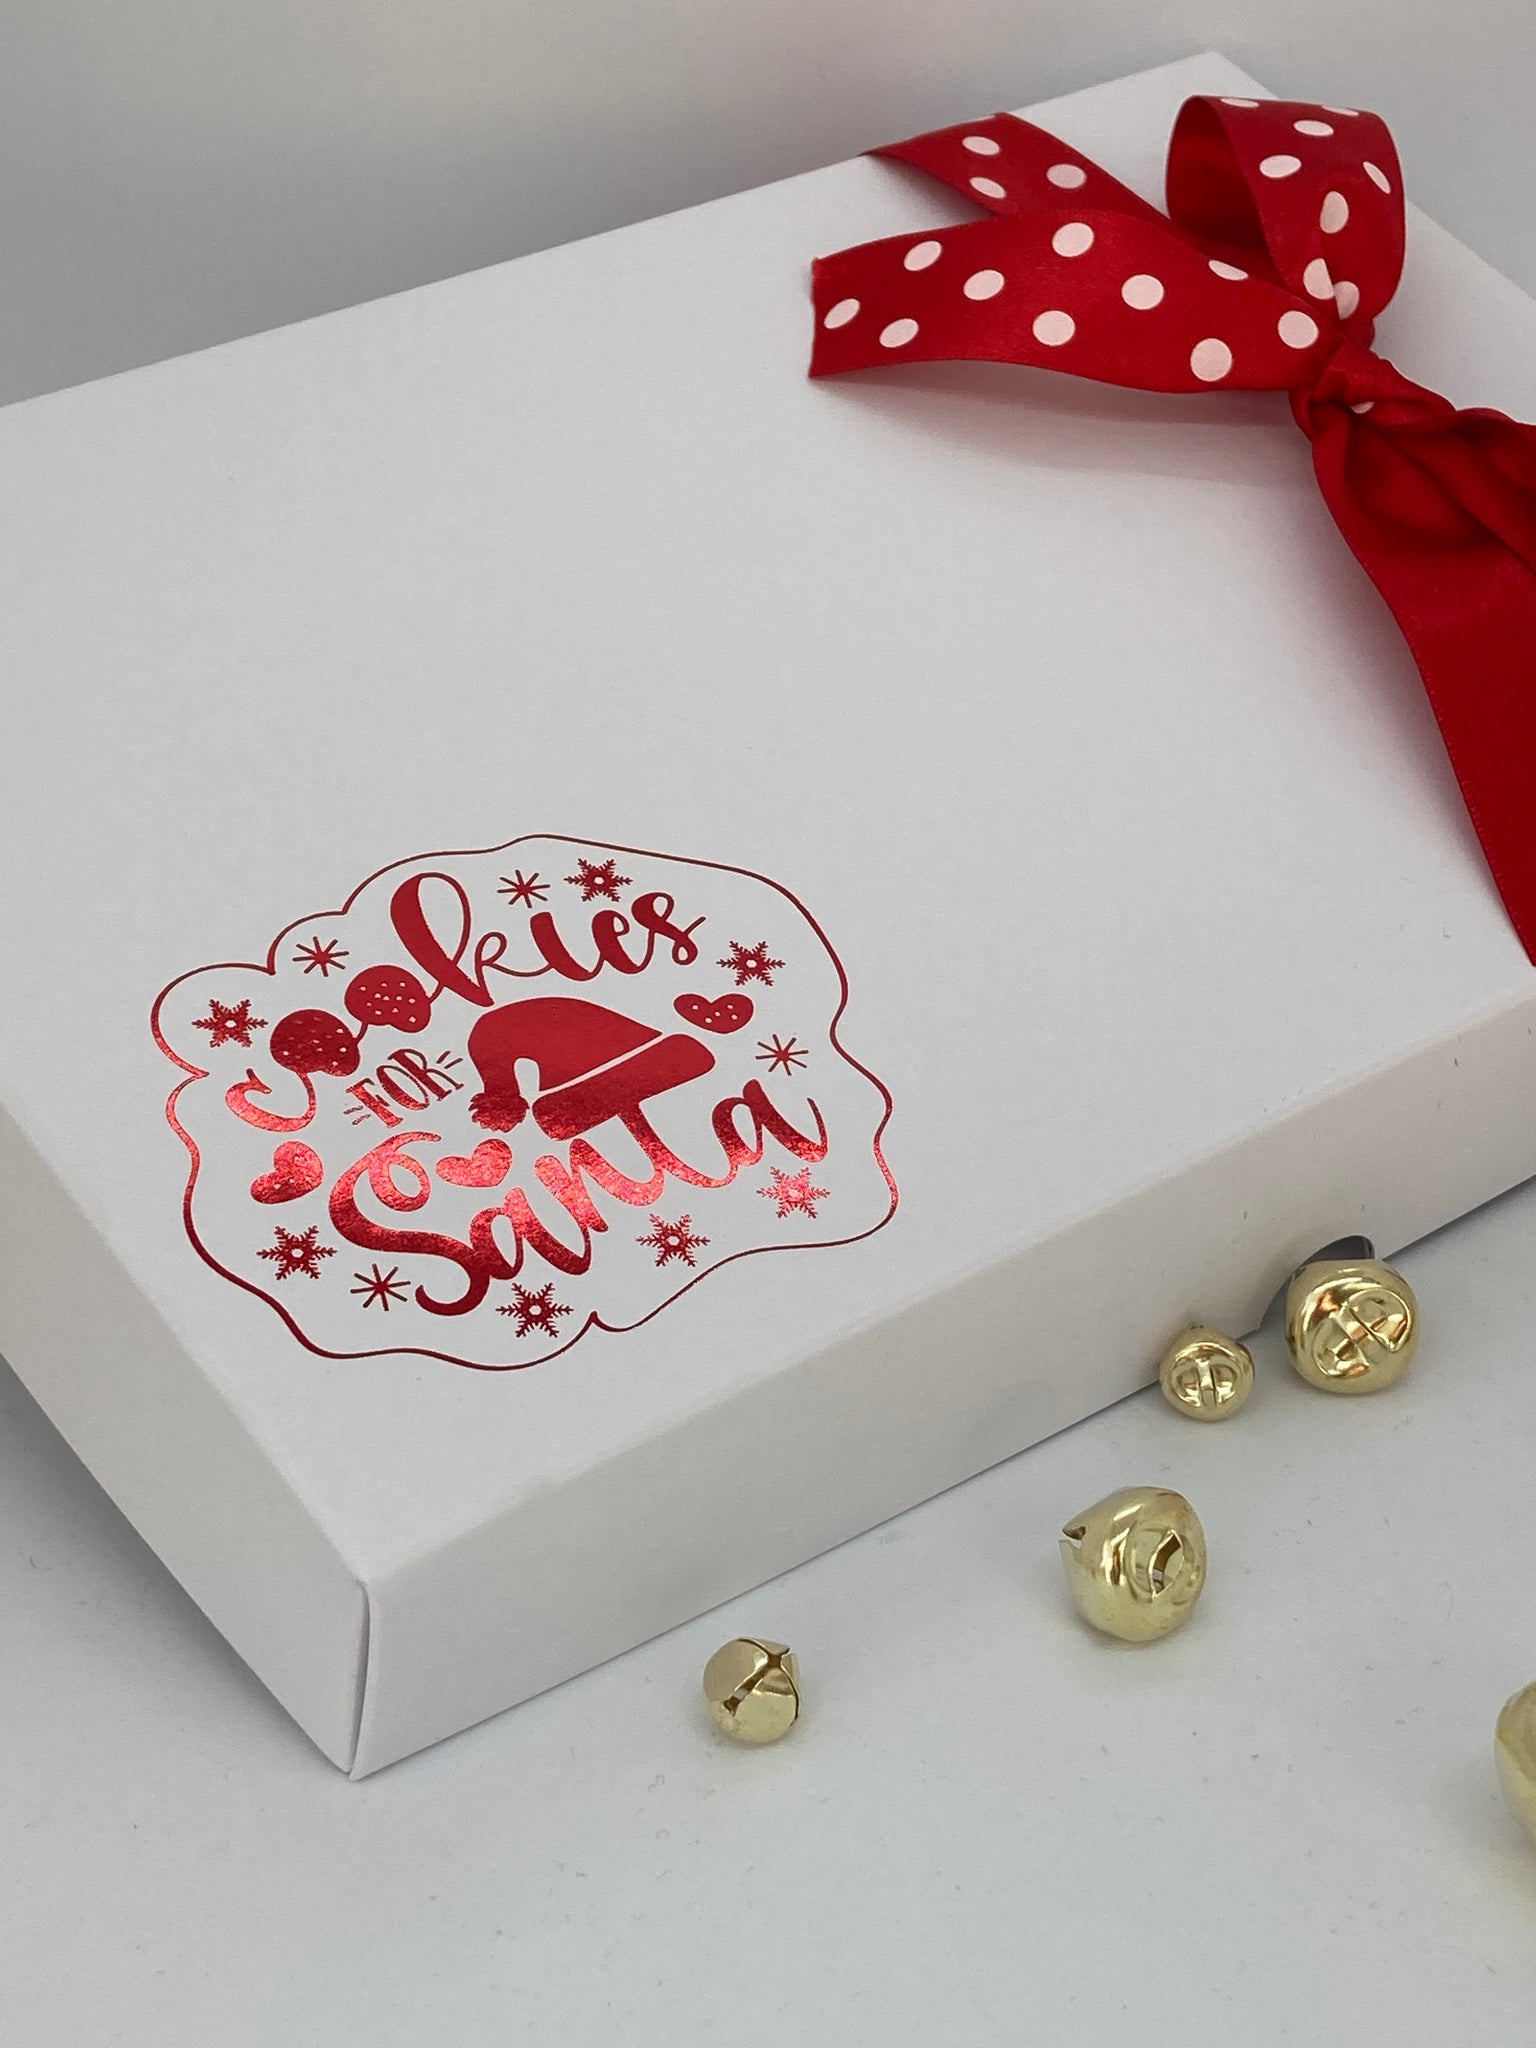 COOKIES FOR SANTA WHITE LID GIFT BOX 240x155x30mm